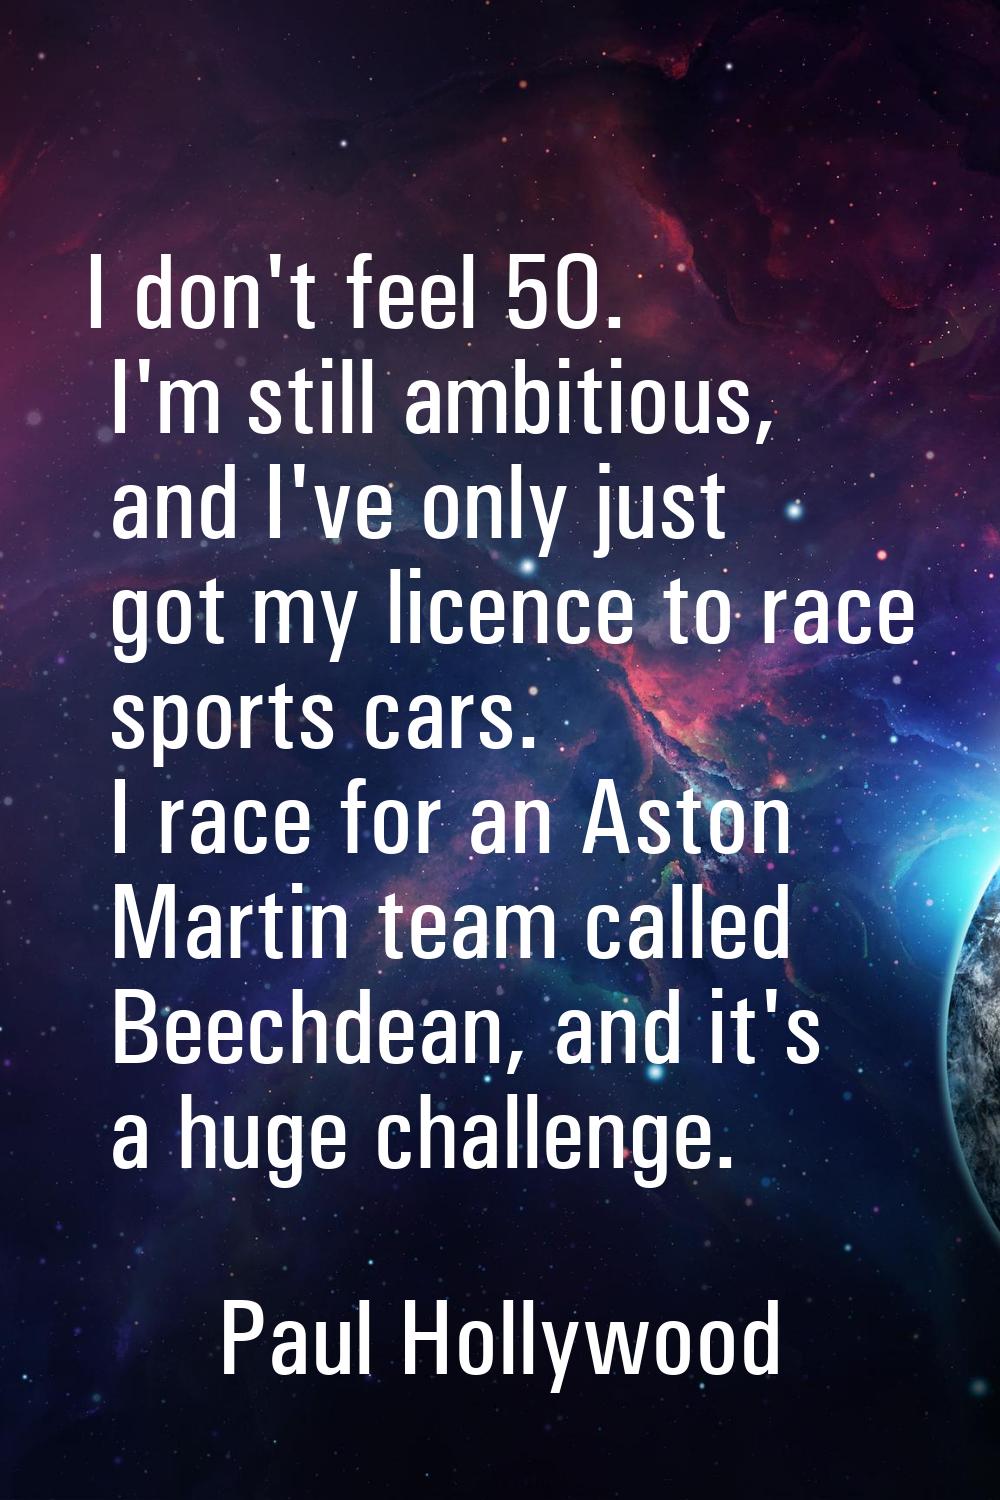 I don't feel 50. I'm still ambitious, and I've only just got my licence to race sports cars. I race